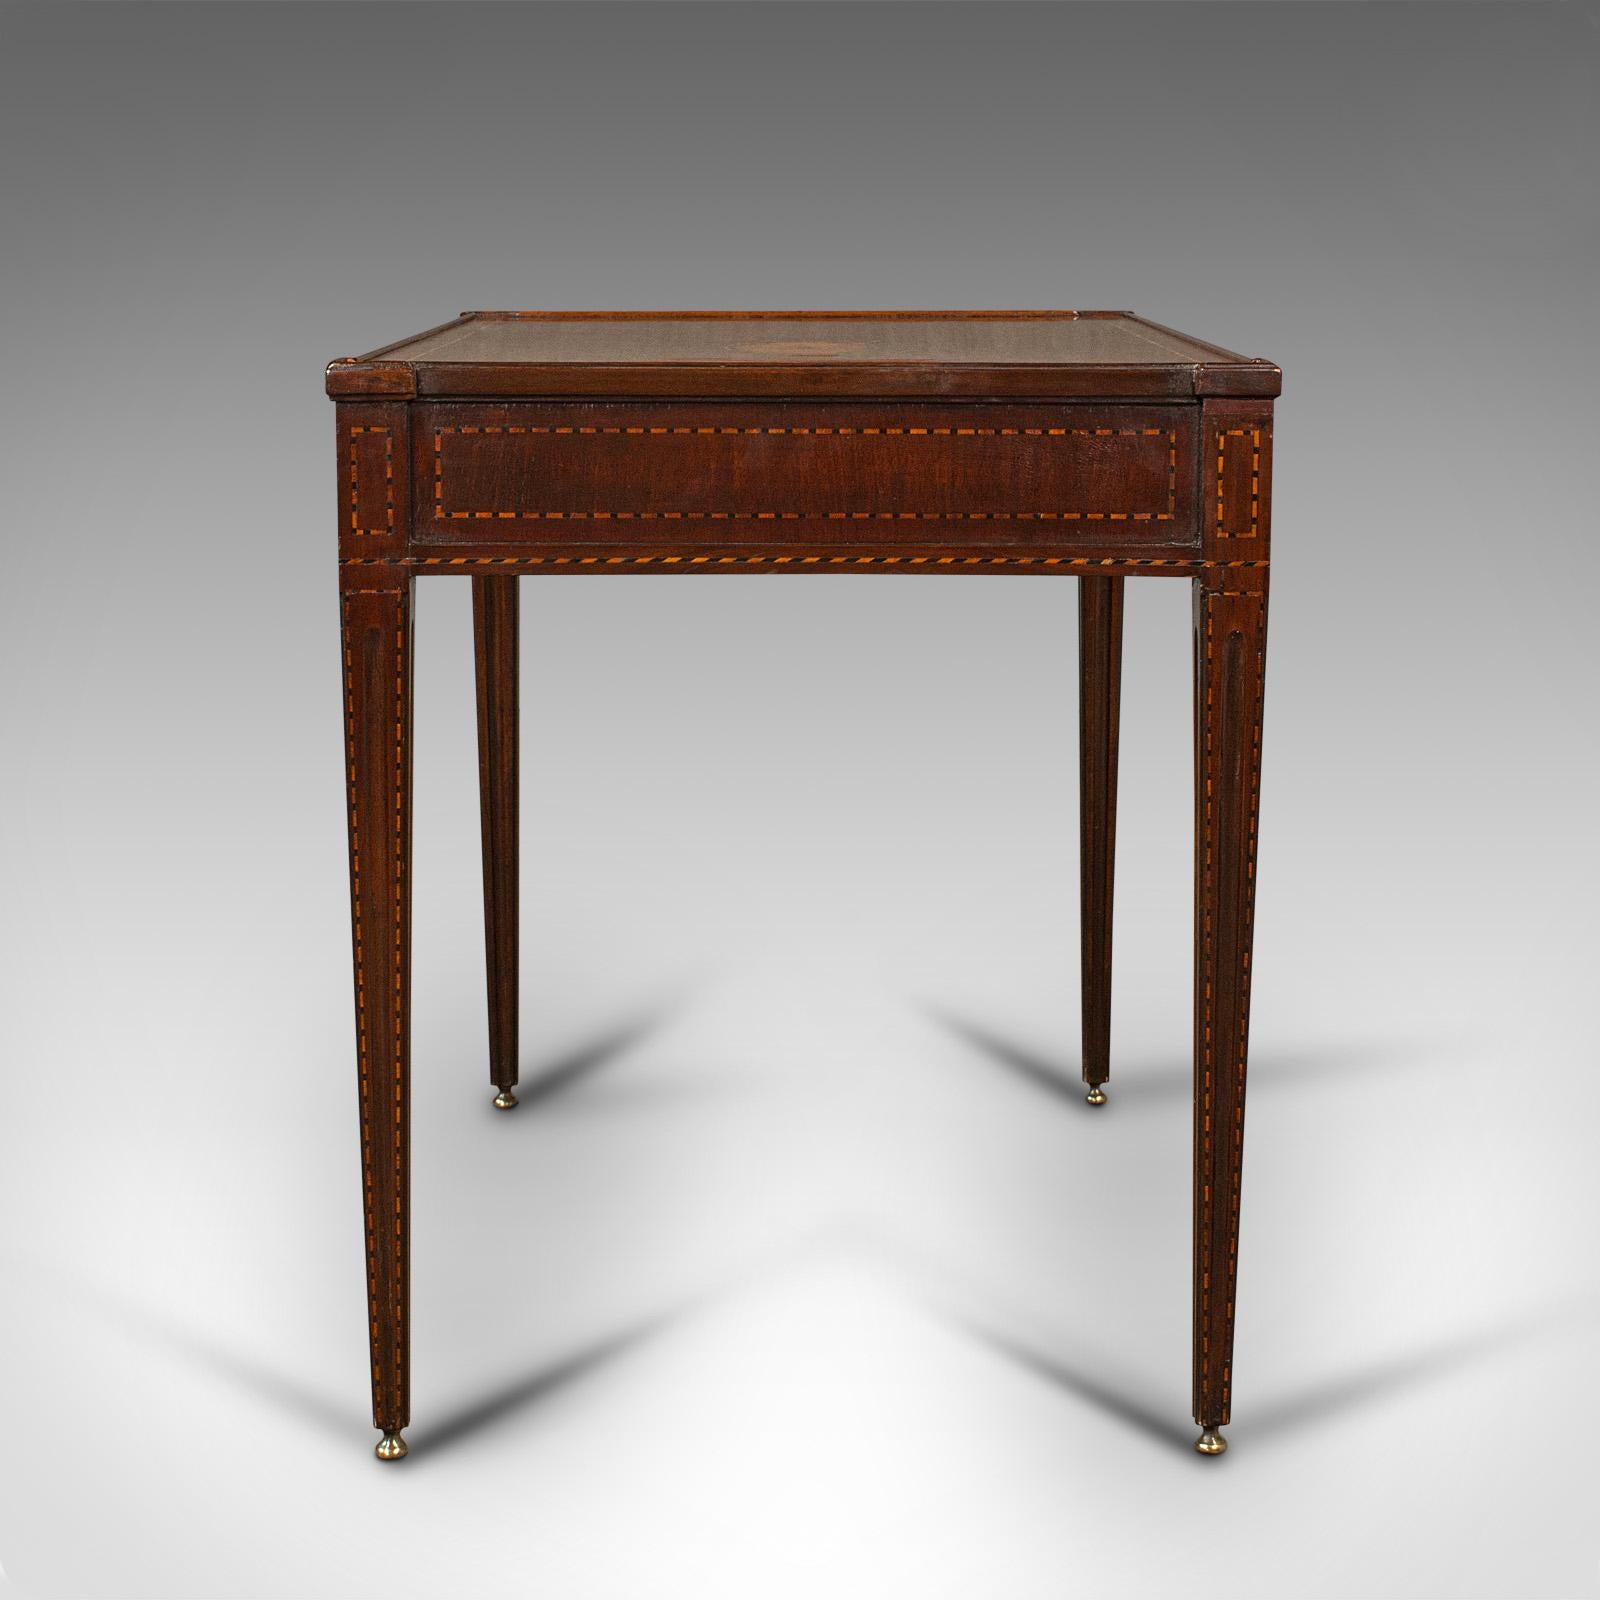 British Antique Silver Table, English, Inlaid, Display, Writing Desk, Georgian, C.1780 For Sale